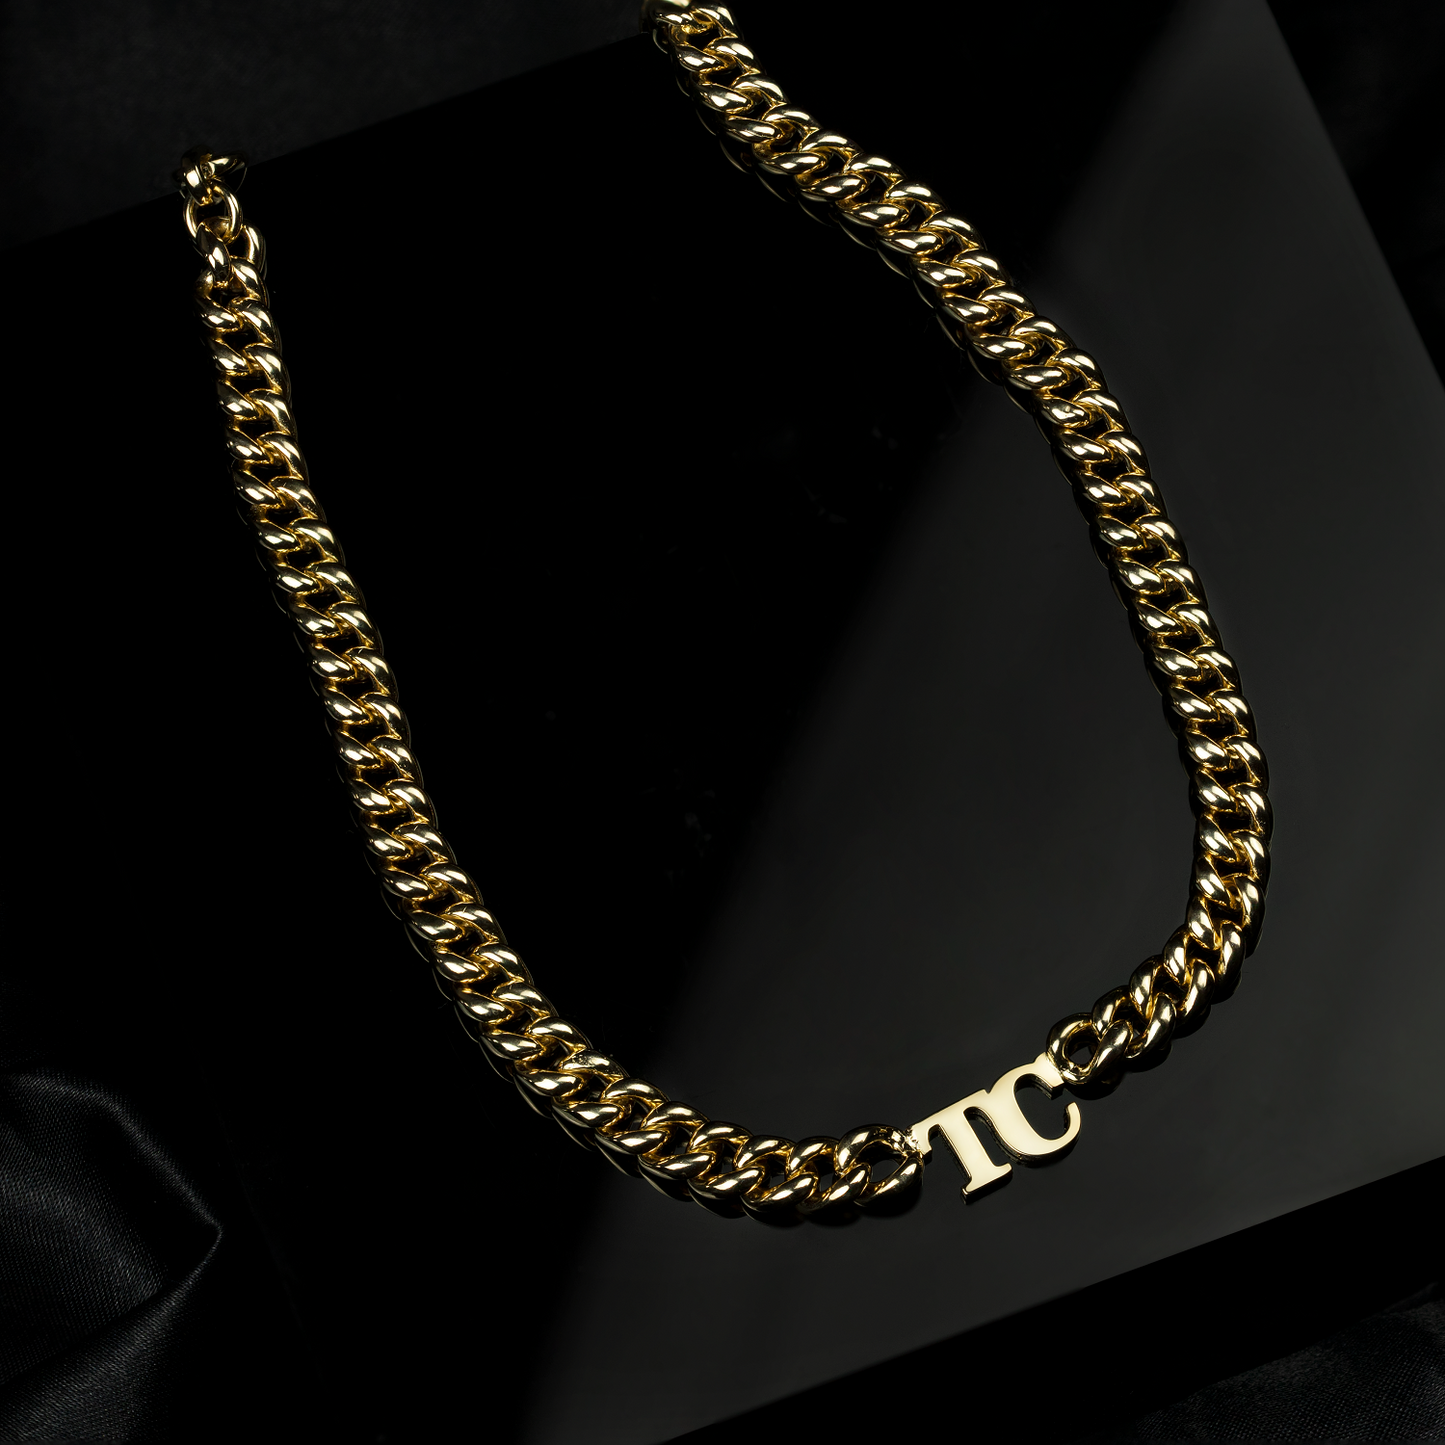 The Double Initial XL Cuban Chain